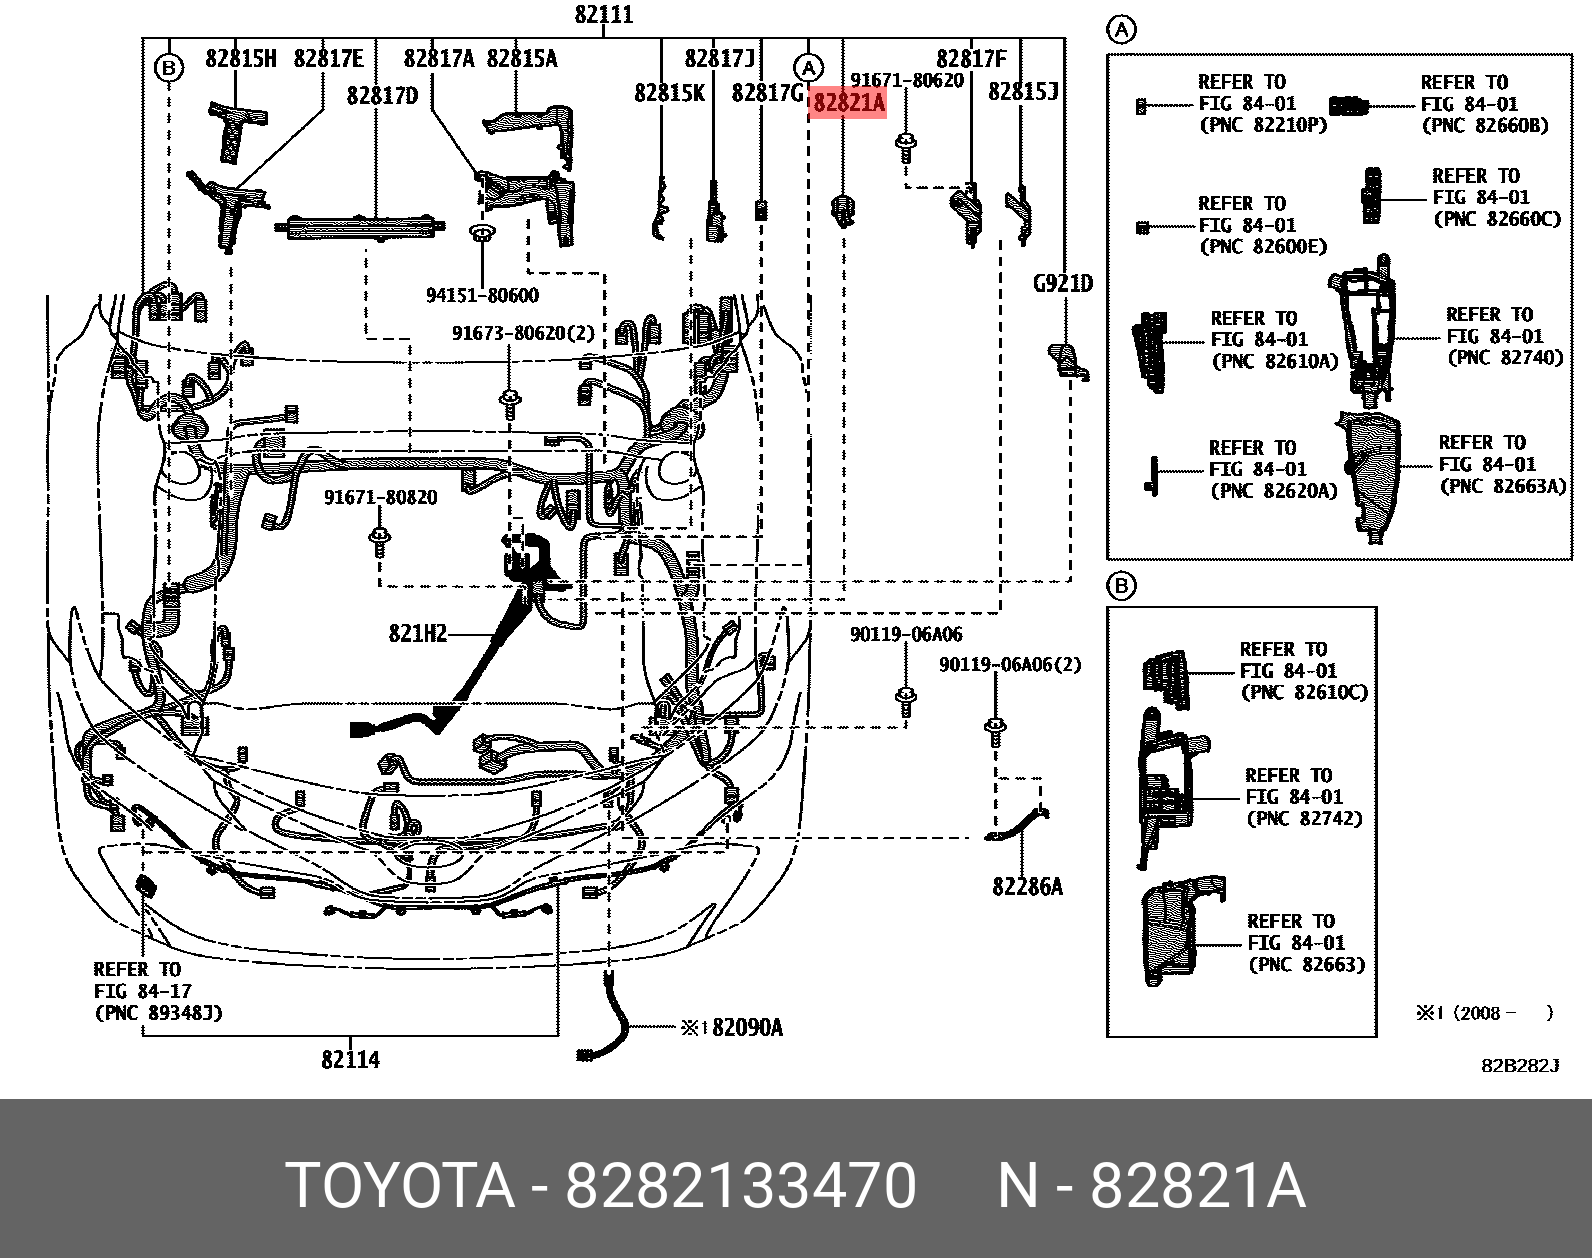 CAMRY 201706-, COVER, CONNECTOR